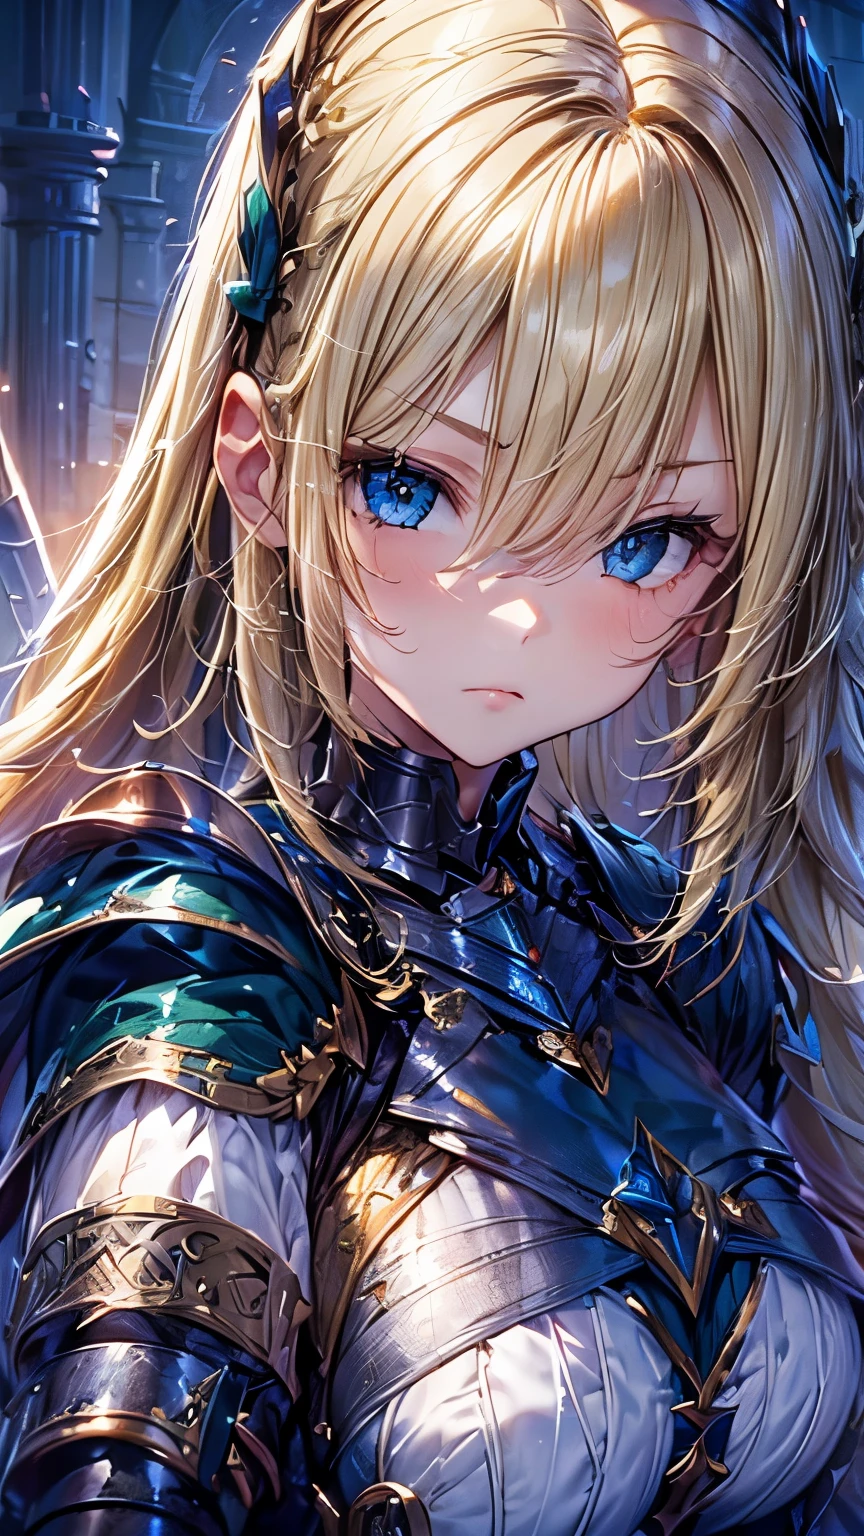 (girl knight)
(((Blonde long hair)))、Bangs with center parting、(Right eye blue),(Left Eye Green)、Big 、Soft 、